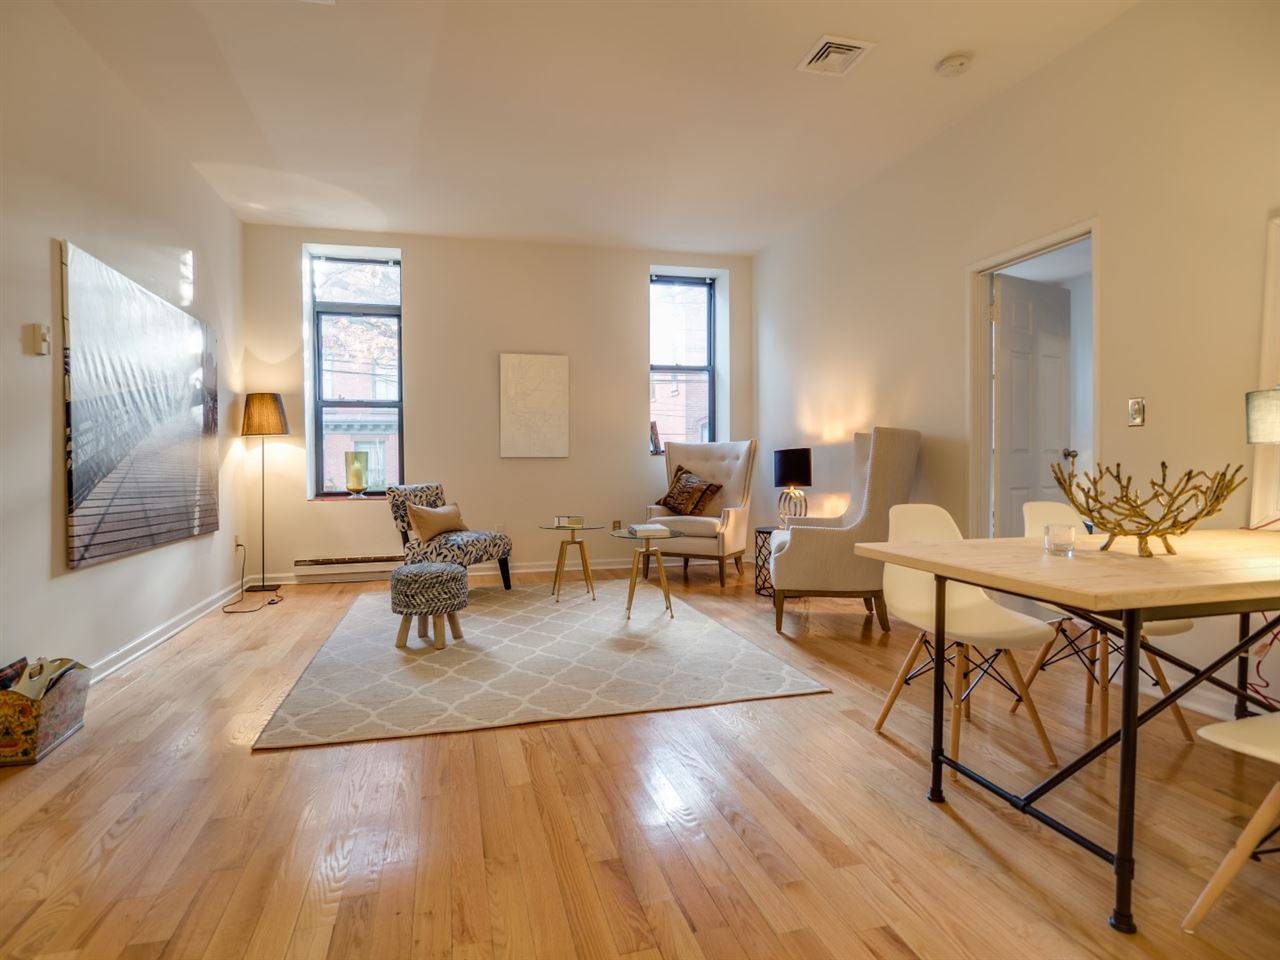 Welcome to this amazing loft style apartment located directly at Van Vorst Park in the downtown neighborhood